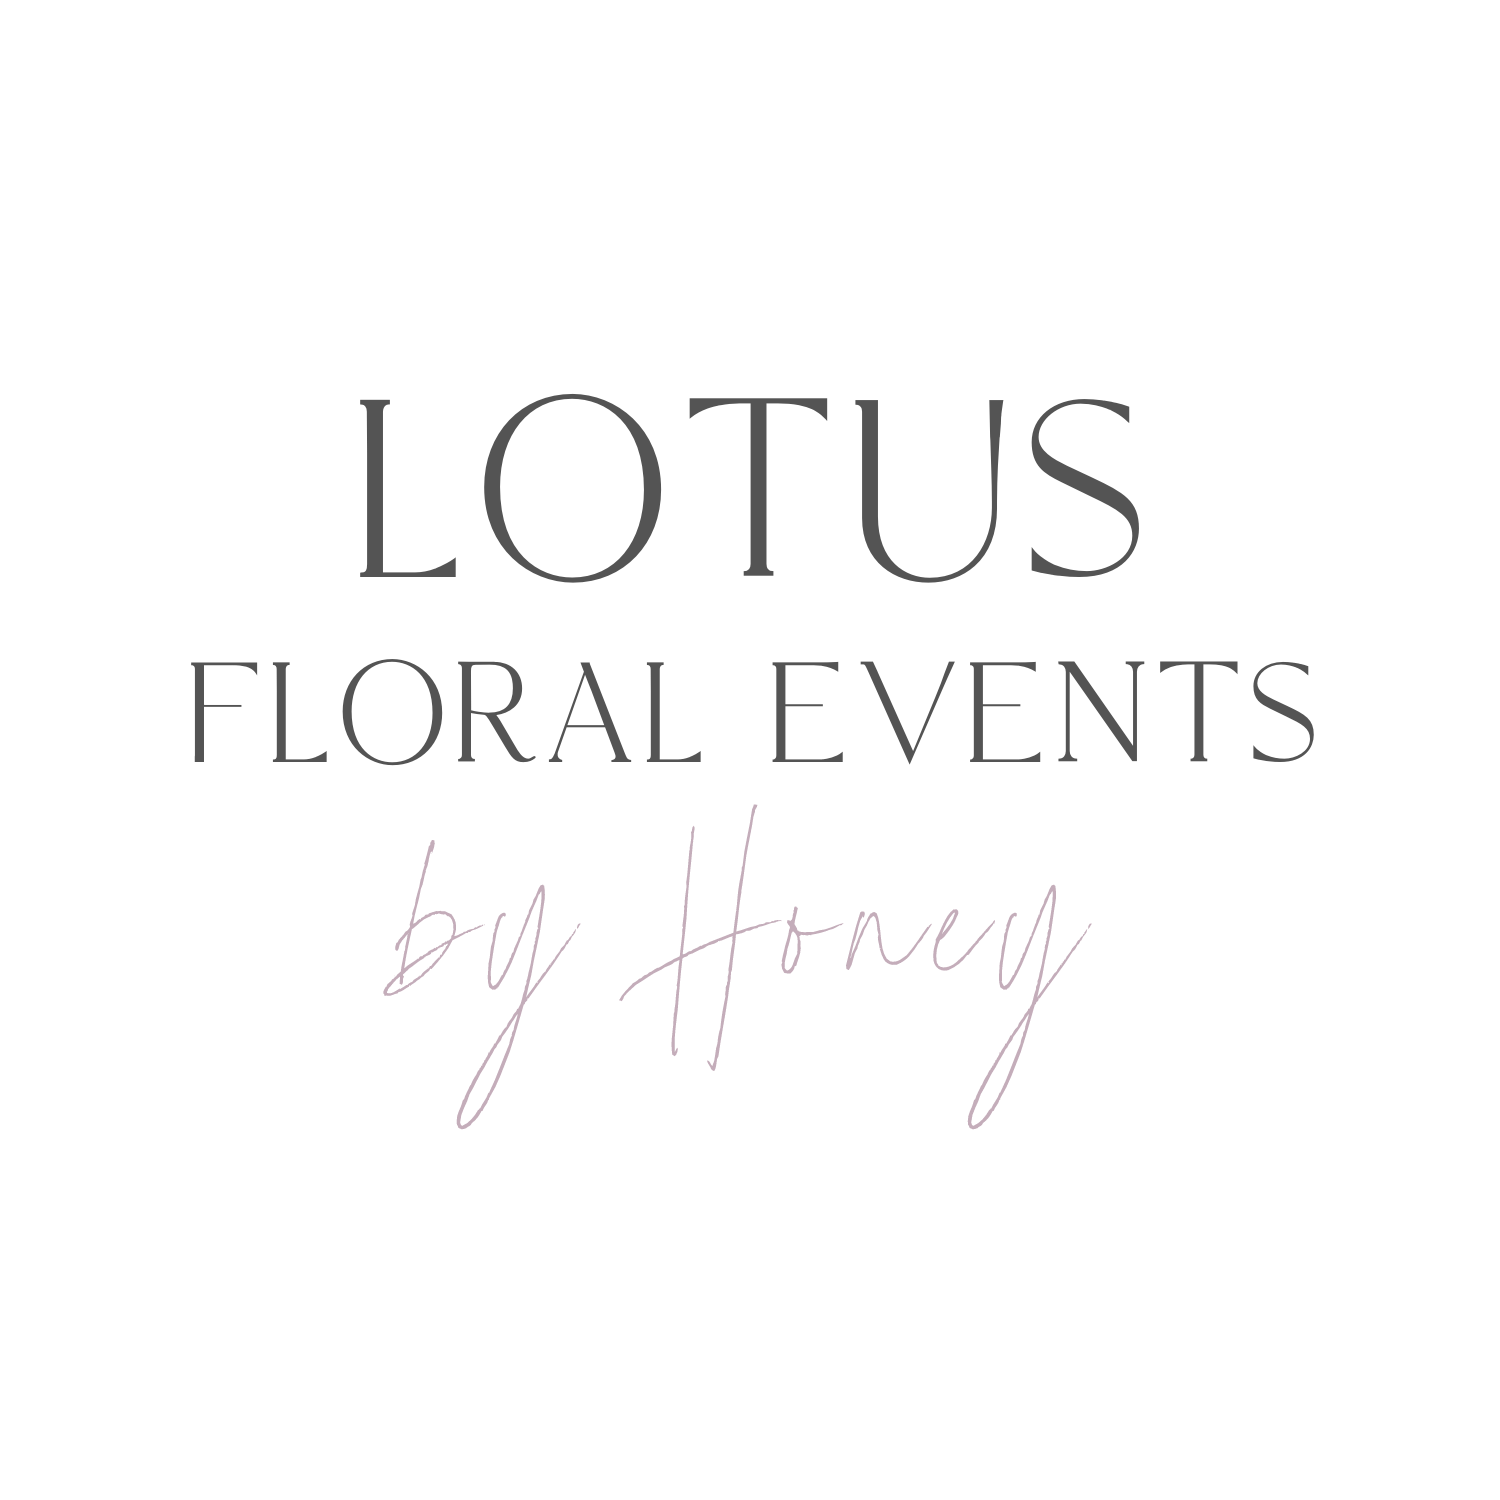 Lotus Floral Events